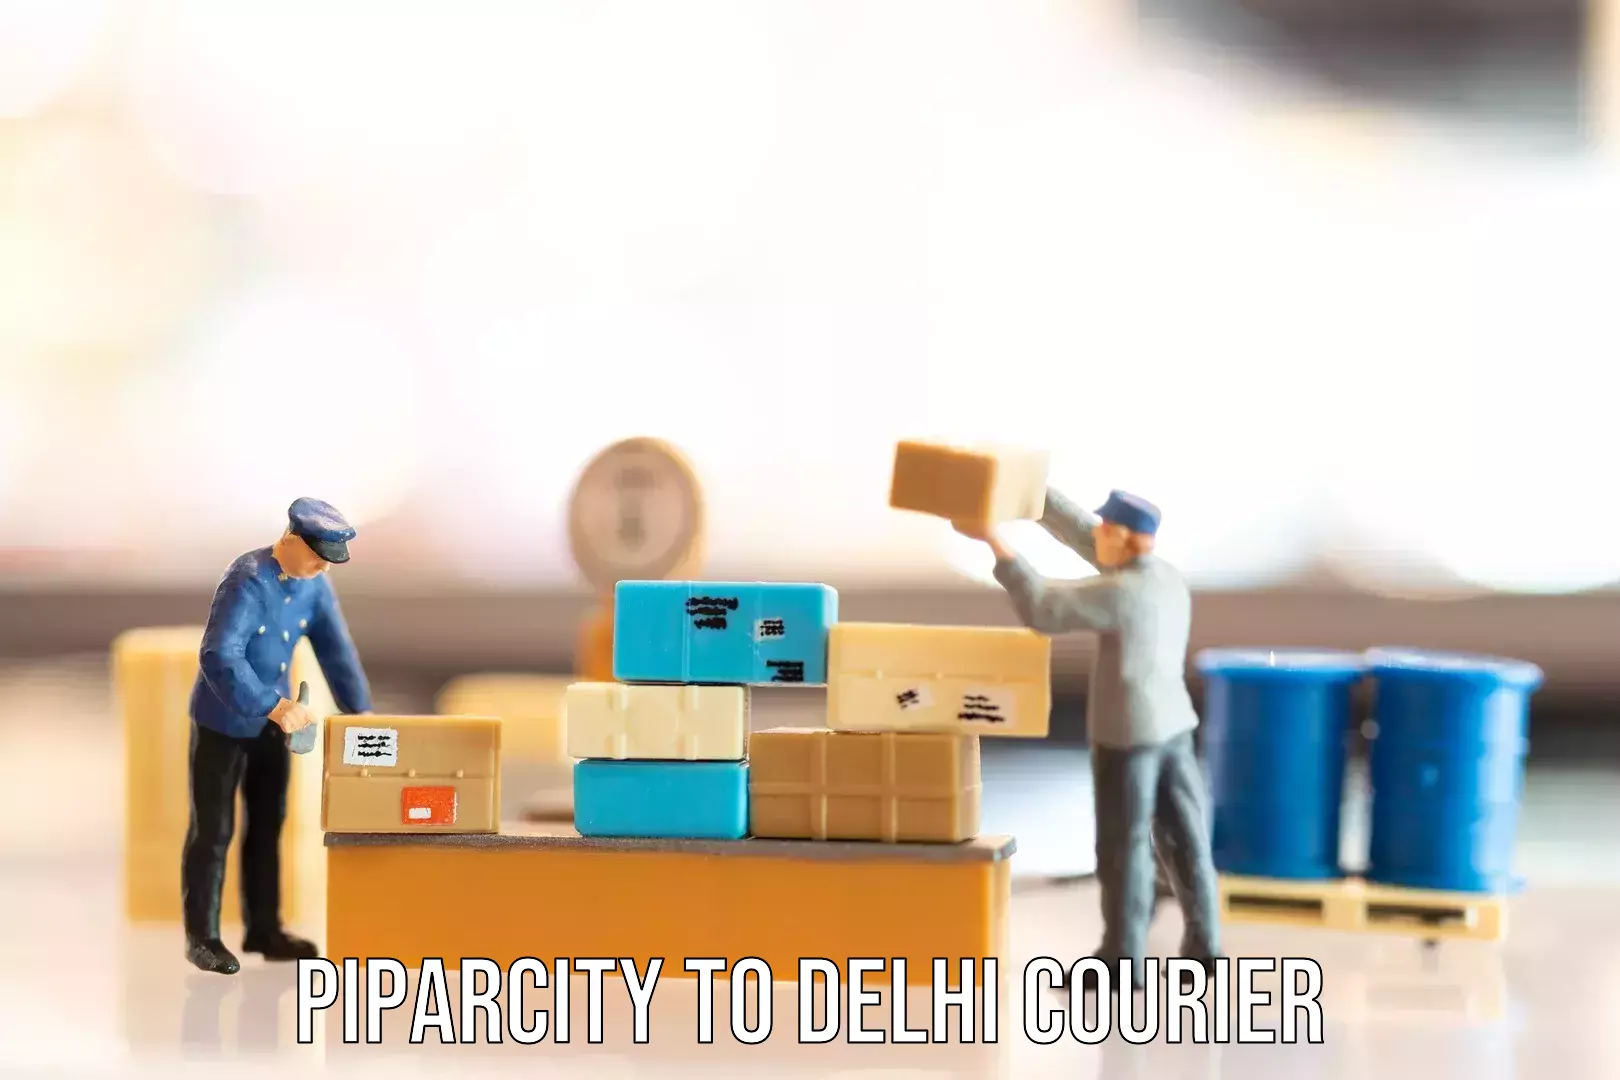 Baggage transport network Piparcity to Delhi